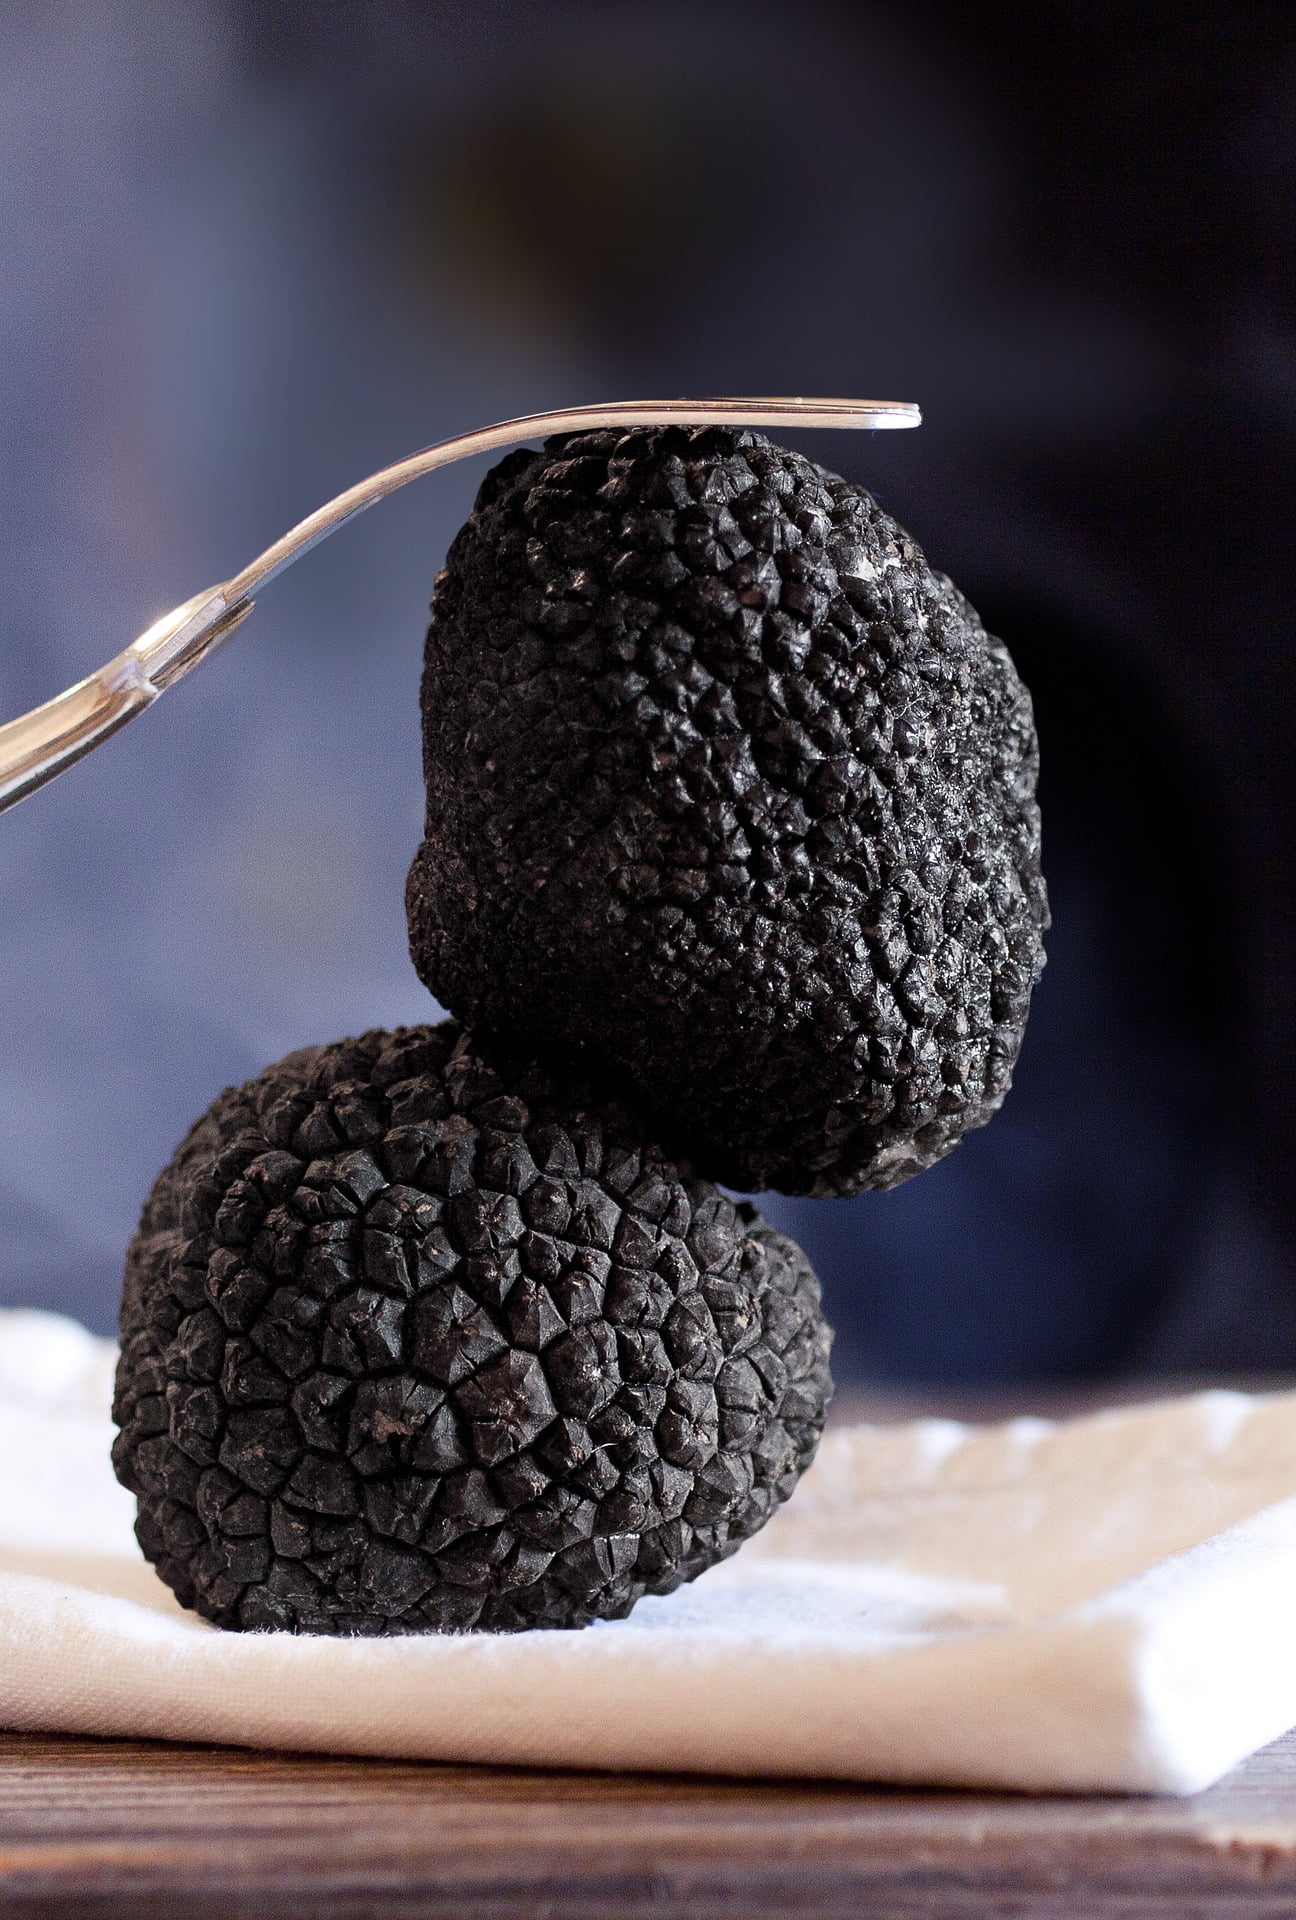 Black truffles are expensive, but worth every bite!